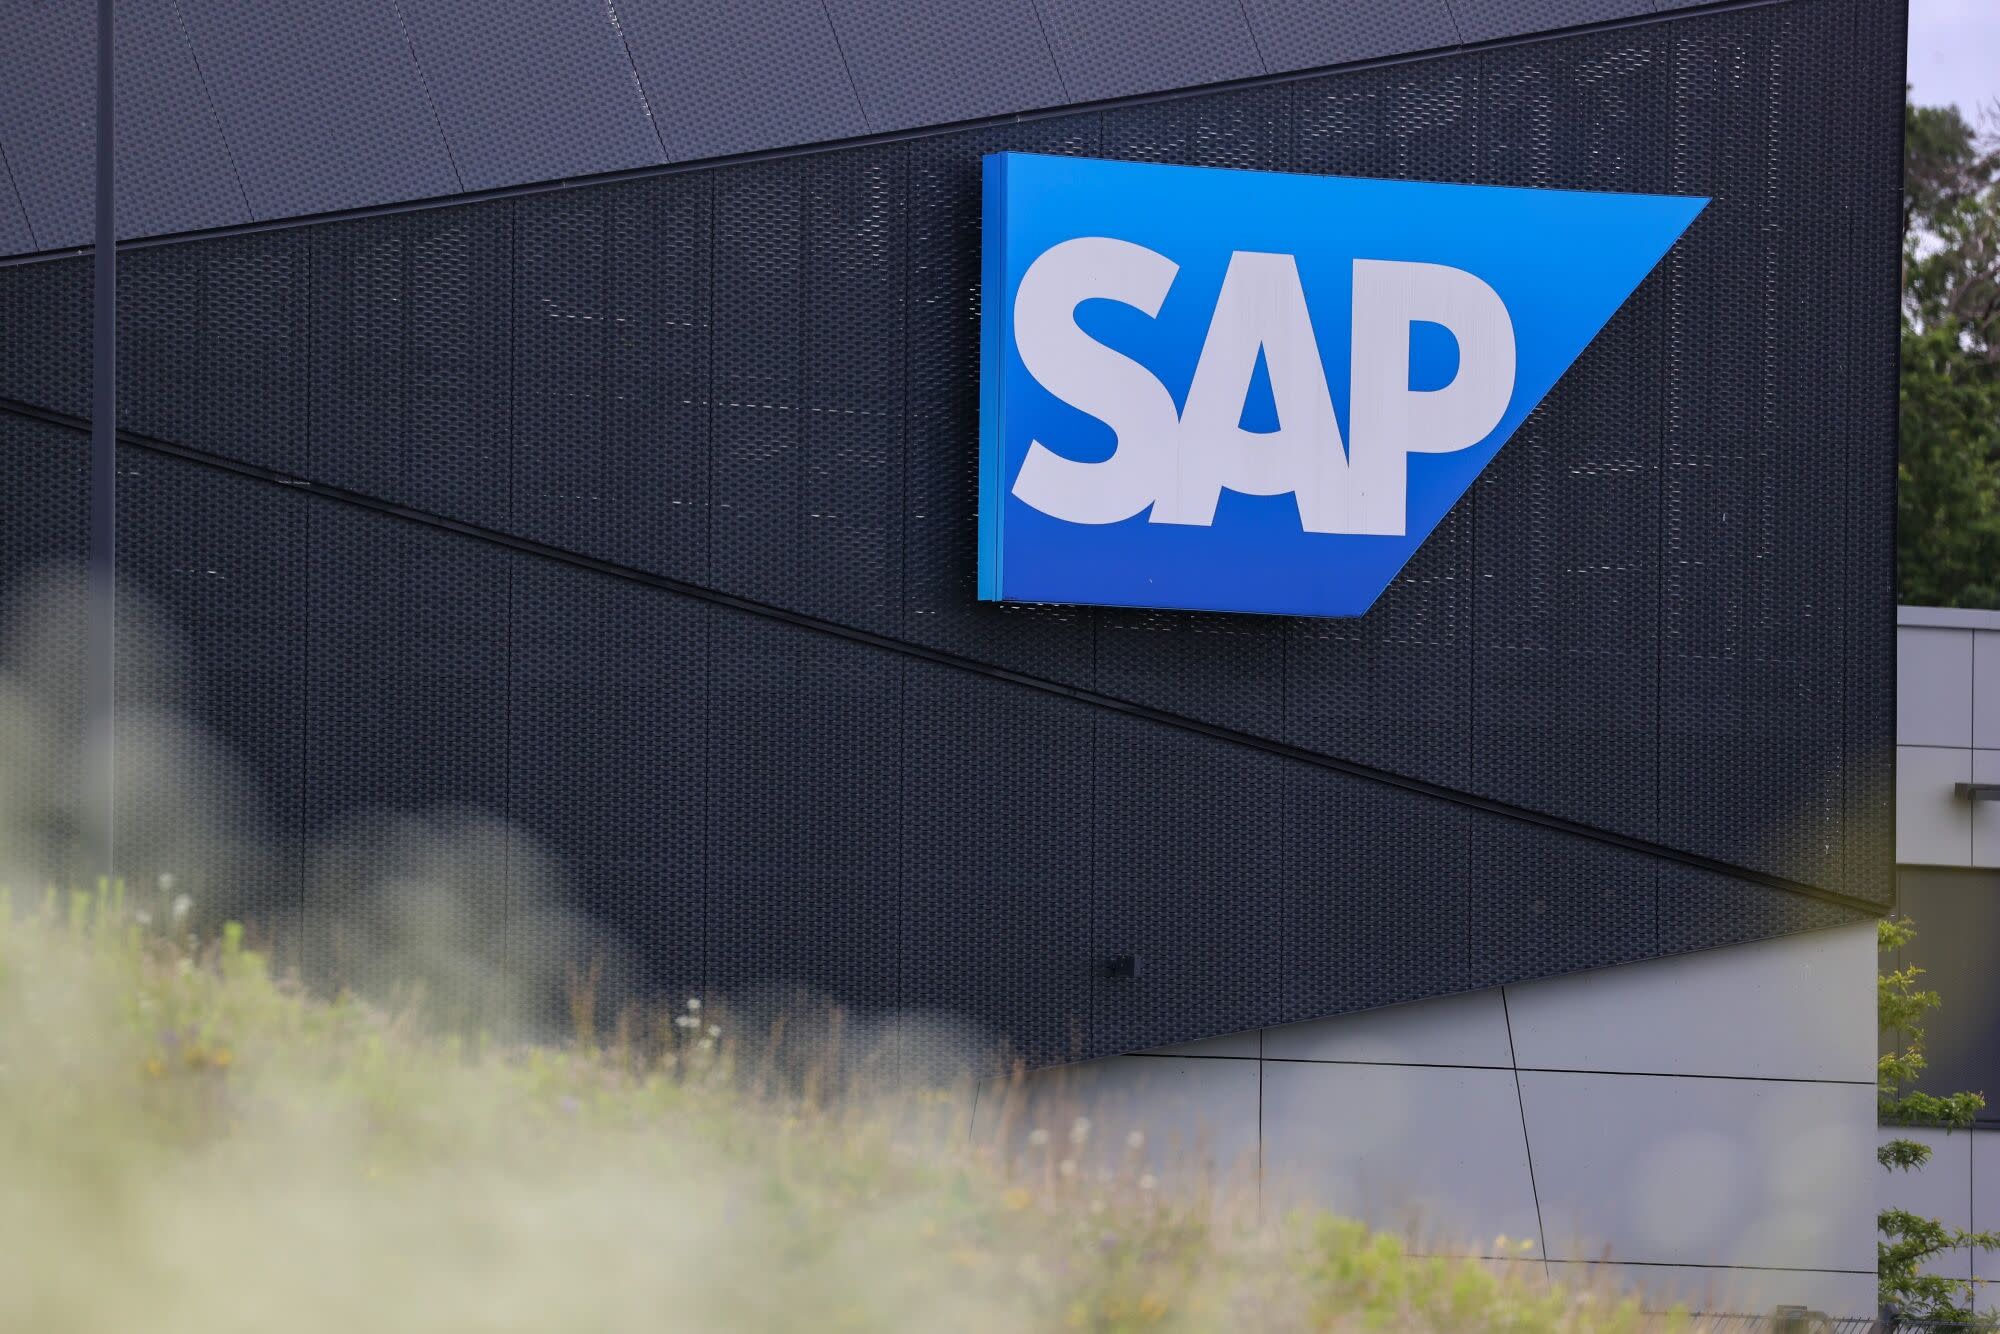 SAP Plans To Cut 8,000 jobs In Major Restructuring